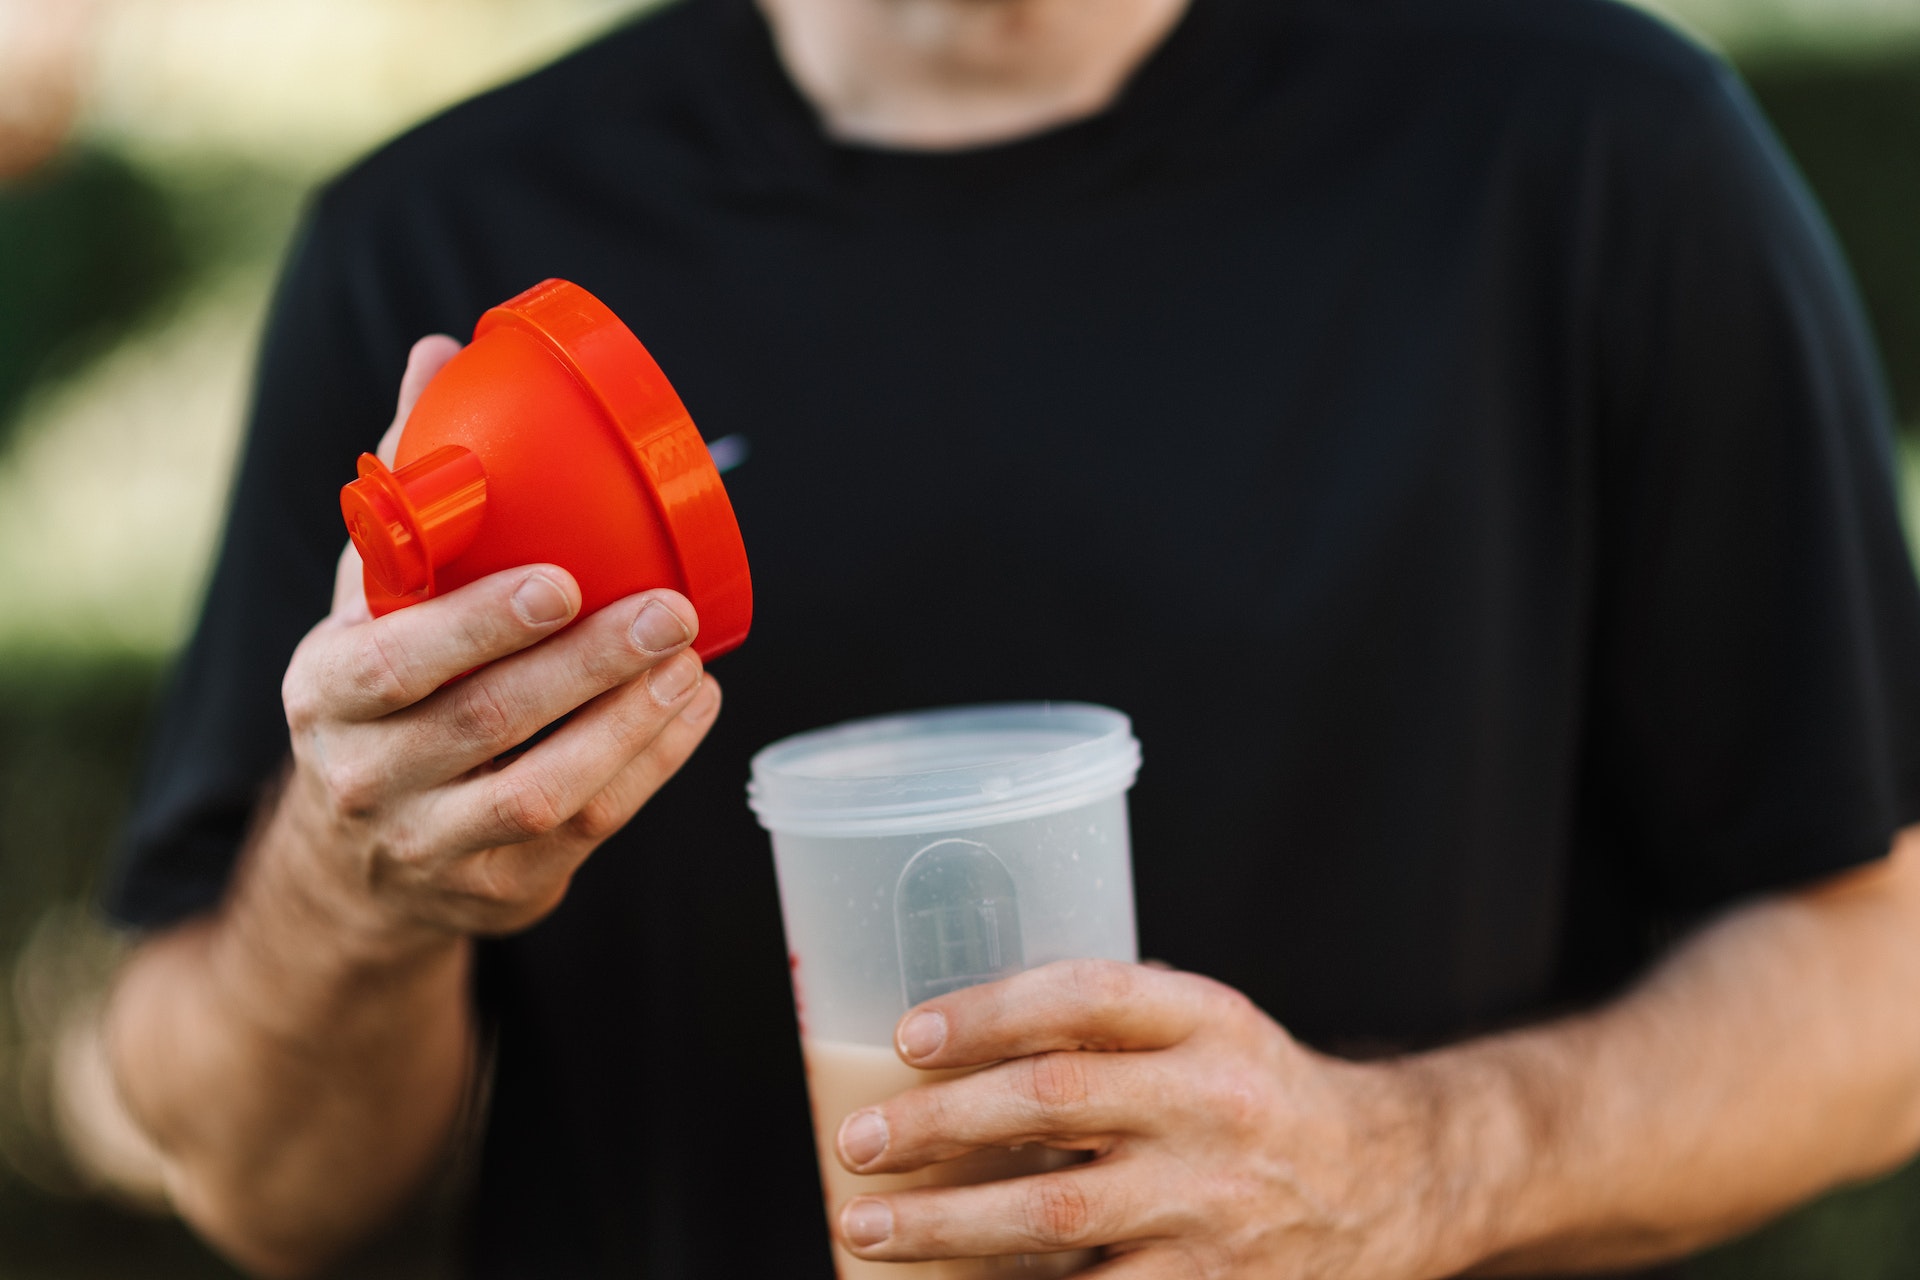 A man wearing black shirt is holding a red lid and plastic tumbler